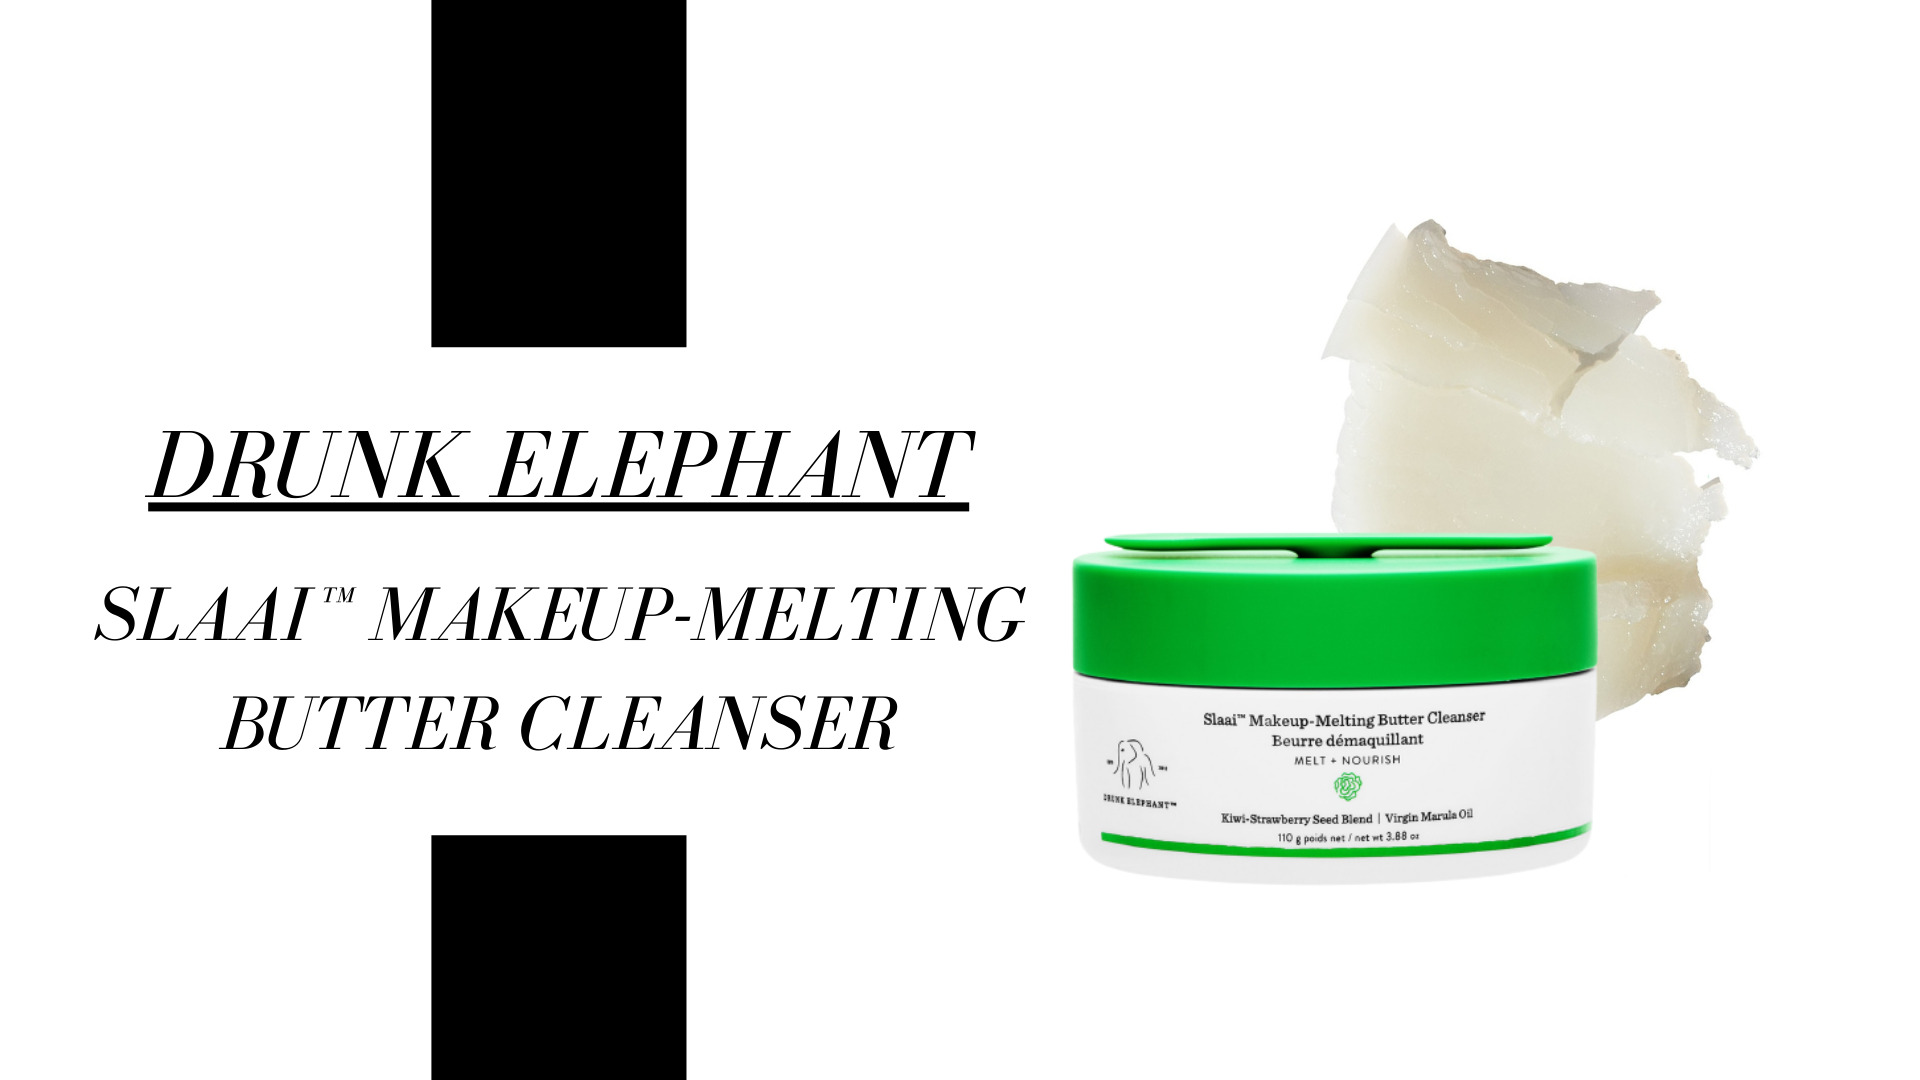 Drunk Elephant products are always super nice and effective. This one is no exception. This cleansing balm melts all traces of dirt, makeup, and sunscreen from the skin, removing even water-resistant formulations. It is amazing for normal, dry, combination, and oily skin and works wonders, especially when your skincare concerns are dryness, redness, dullness, and uneven texture. This product is also vegan and cruelty-free. Plus, it is free of essential oils, silicones, and fragrance.